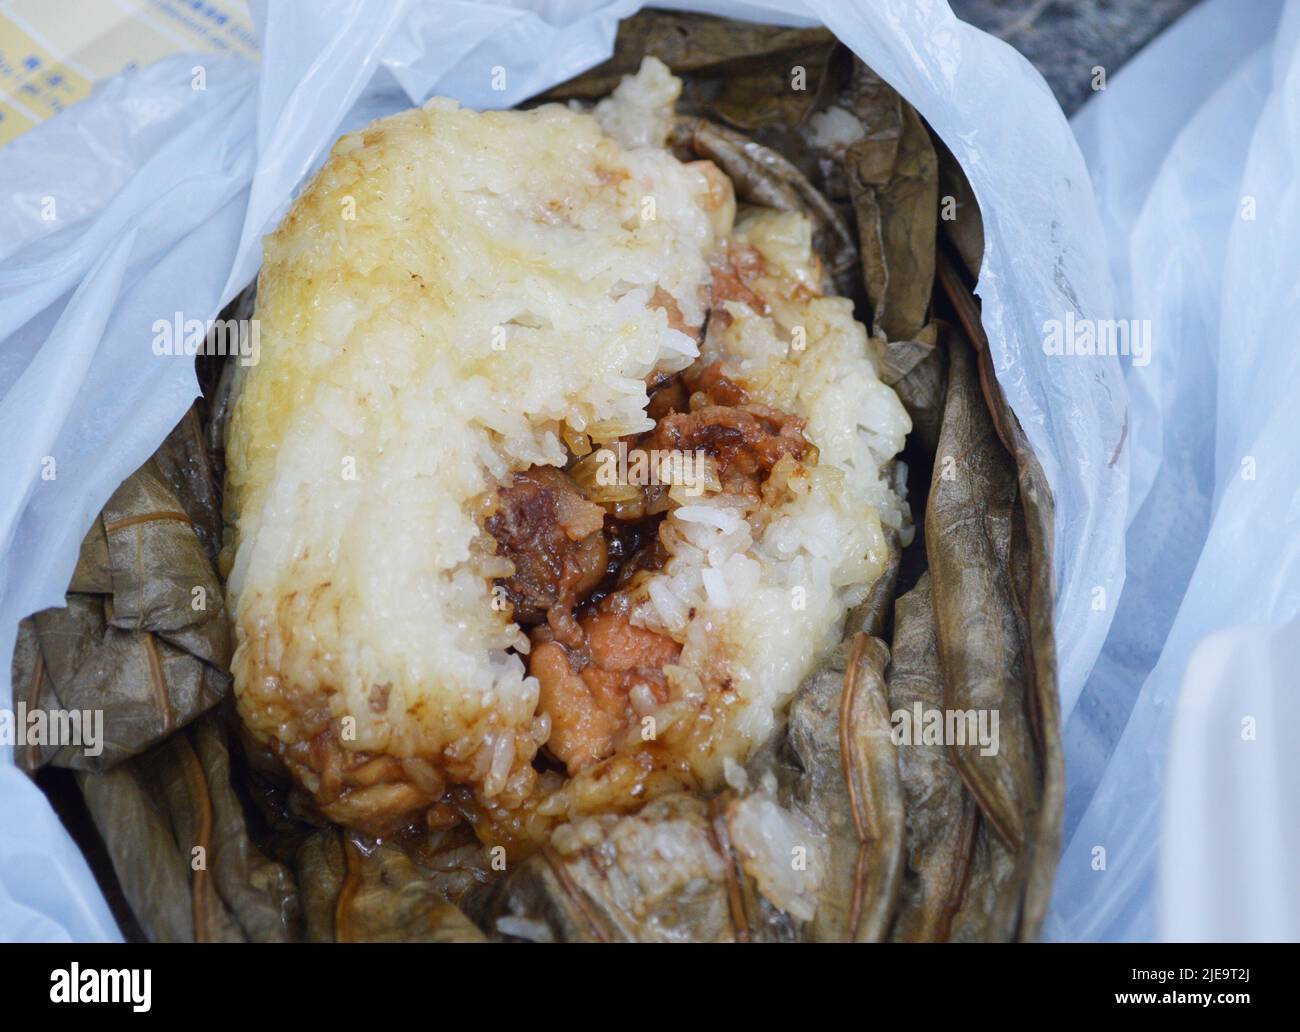 Famous Hong Kong dim sum 'Lo Mai Gai', the glutinous rice with meat and mushroom wrapped by lotus leaf. Stock Photo